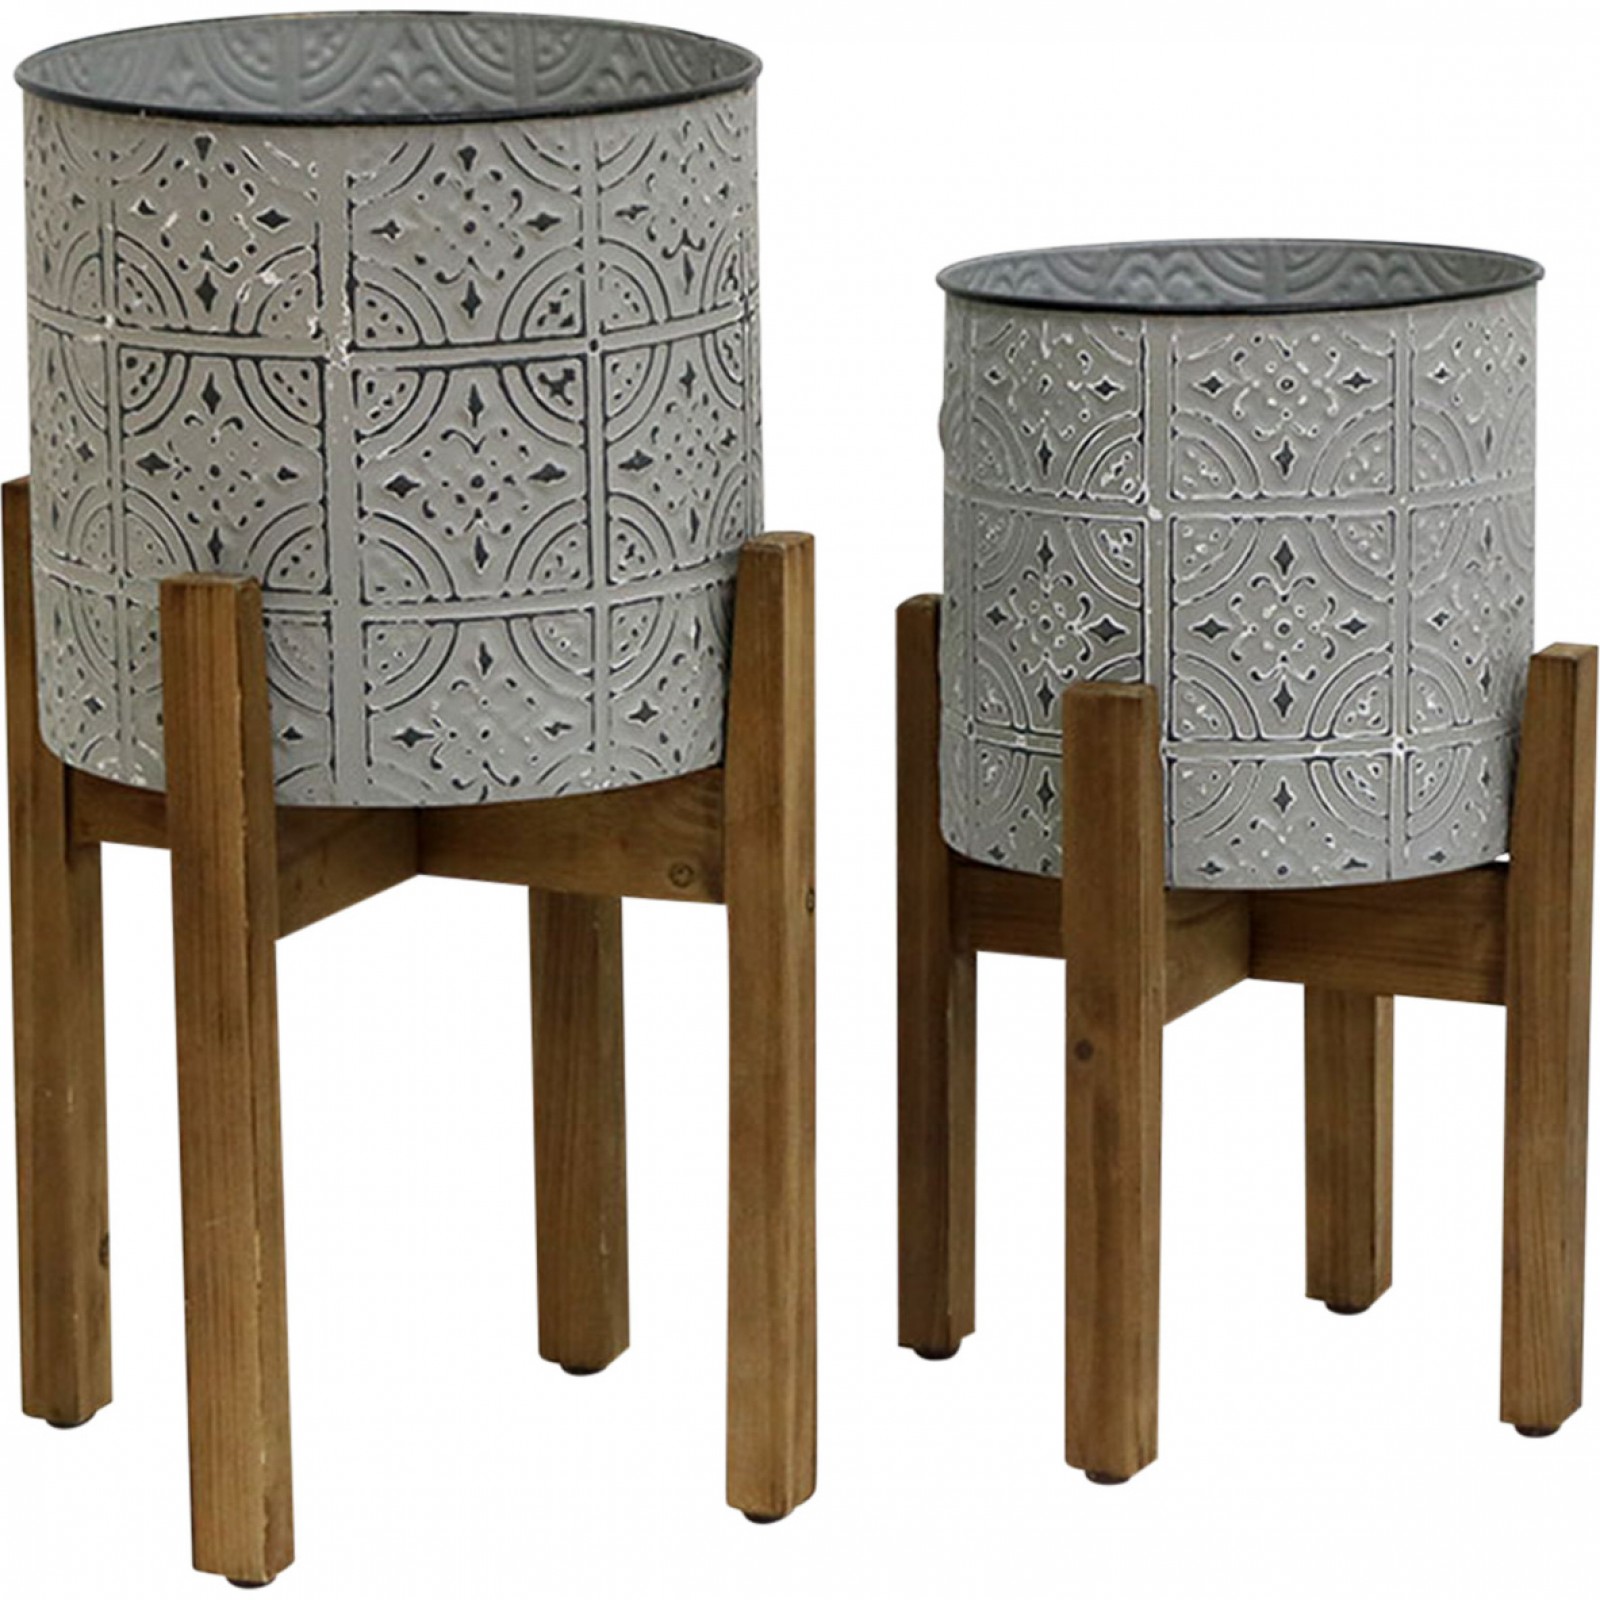 Grey Ornate Planters With Wooden Stand Set of 2